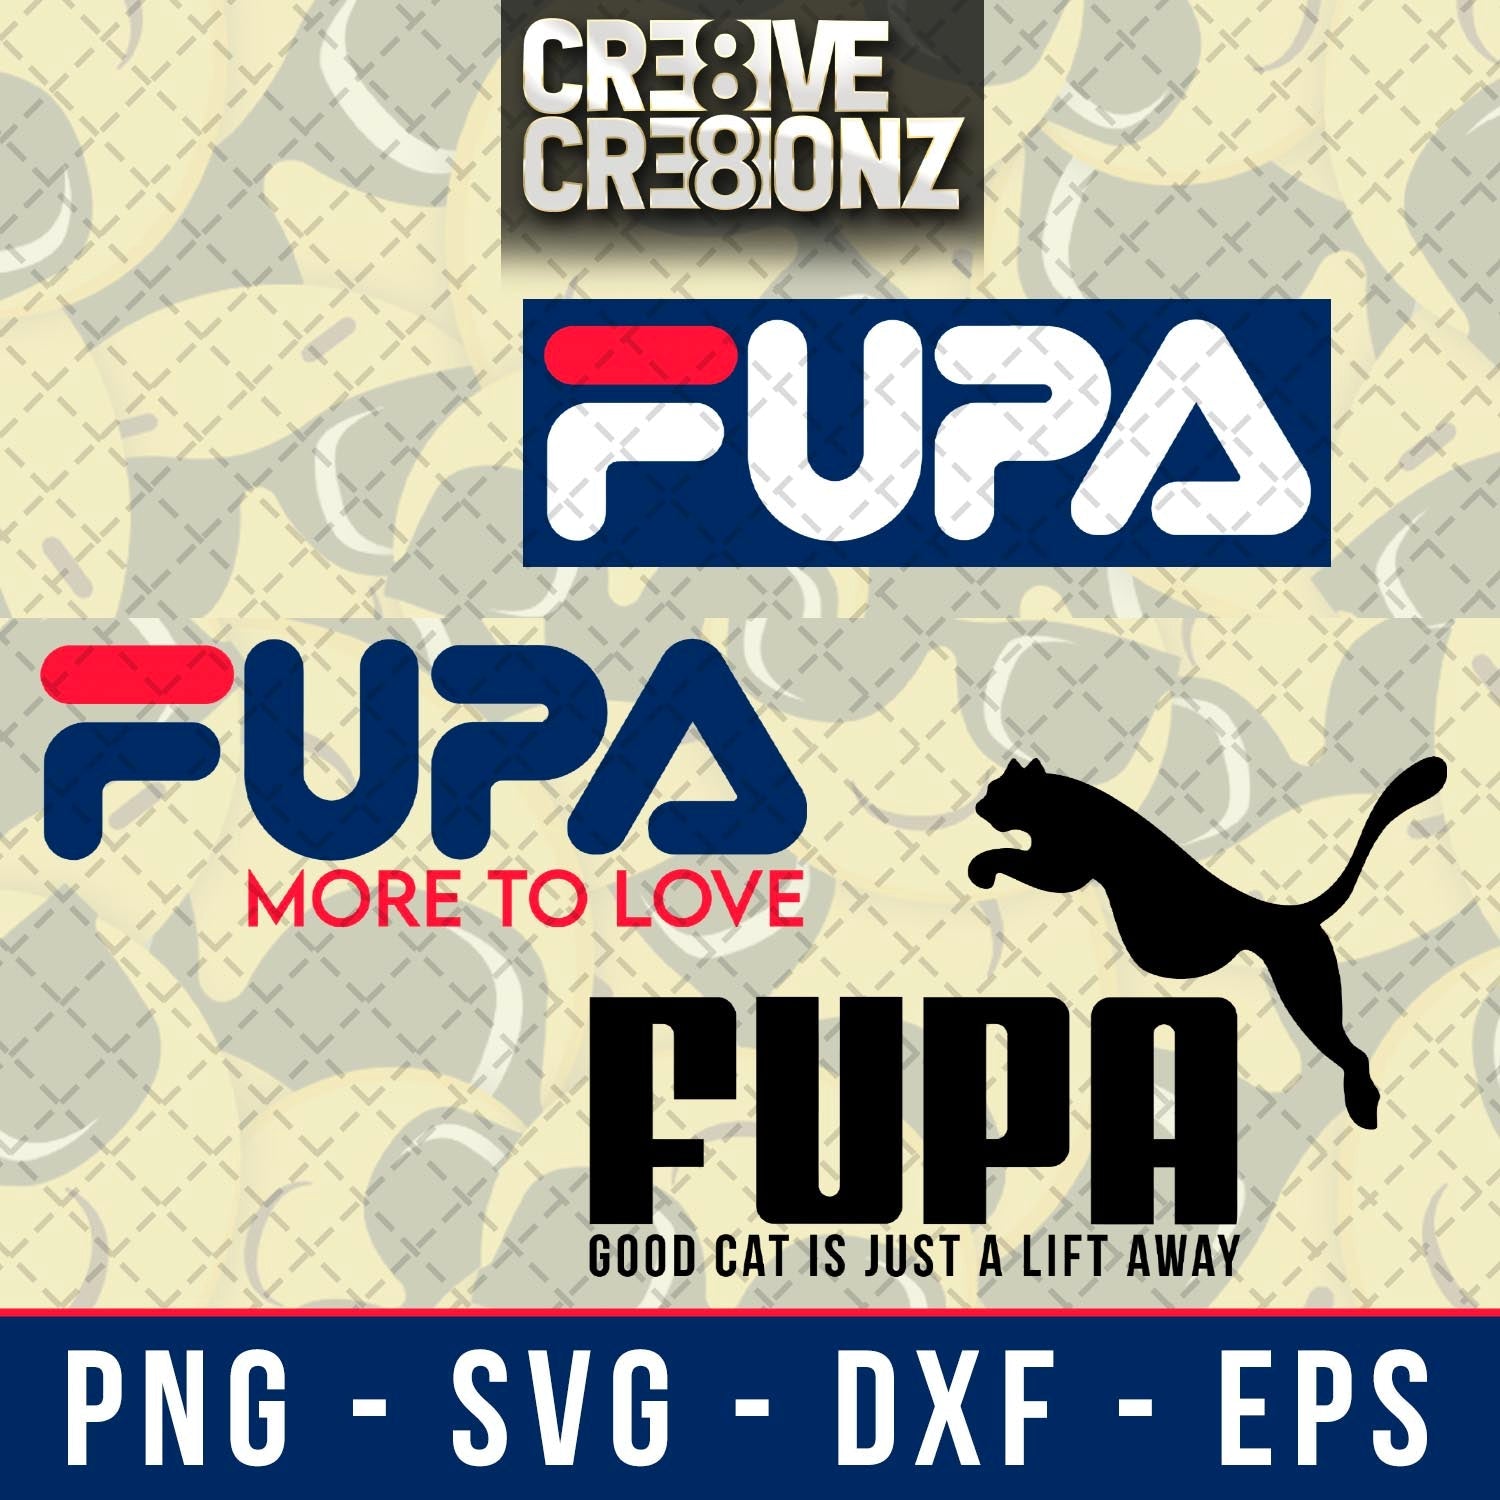 Parody FUPA SVG - Cre8ive Cre8ionz